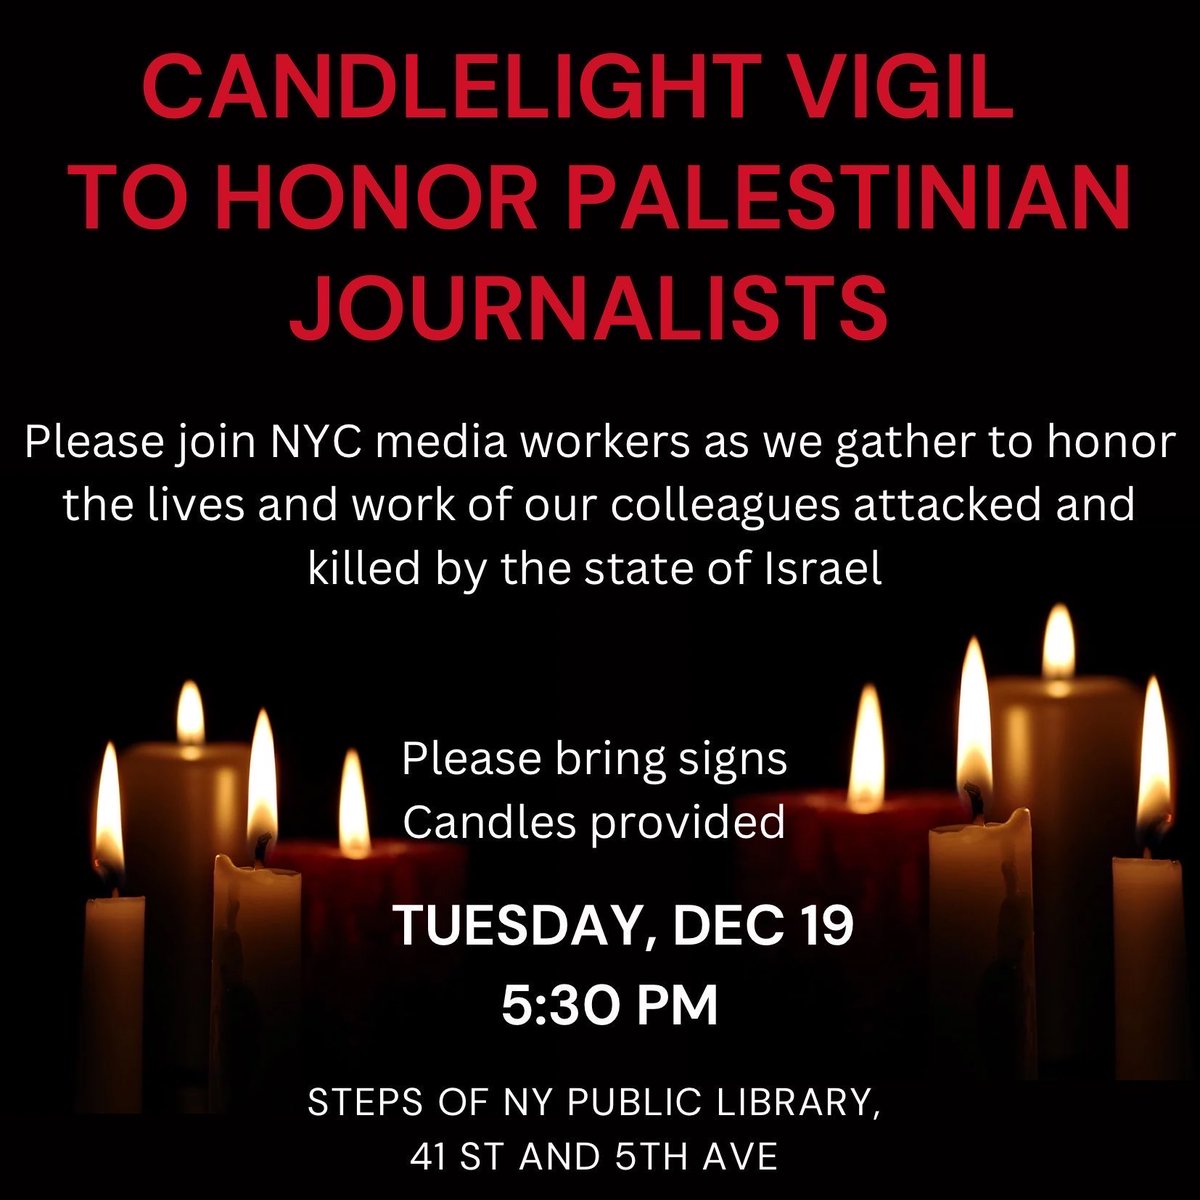 According to @pressfreedom, the Gaza war is the deadliest for media workers ever recorded, with 57 Palestinian, 4 Israeli, & 3 Lebanese journalists killed. We're joining members from the NewsGuild & others in honoring our colleagues this Tues. Bringing signs & flowers encouraged.